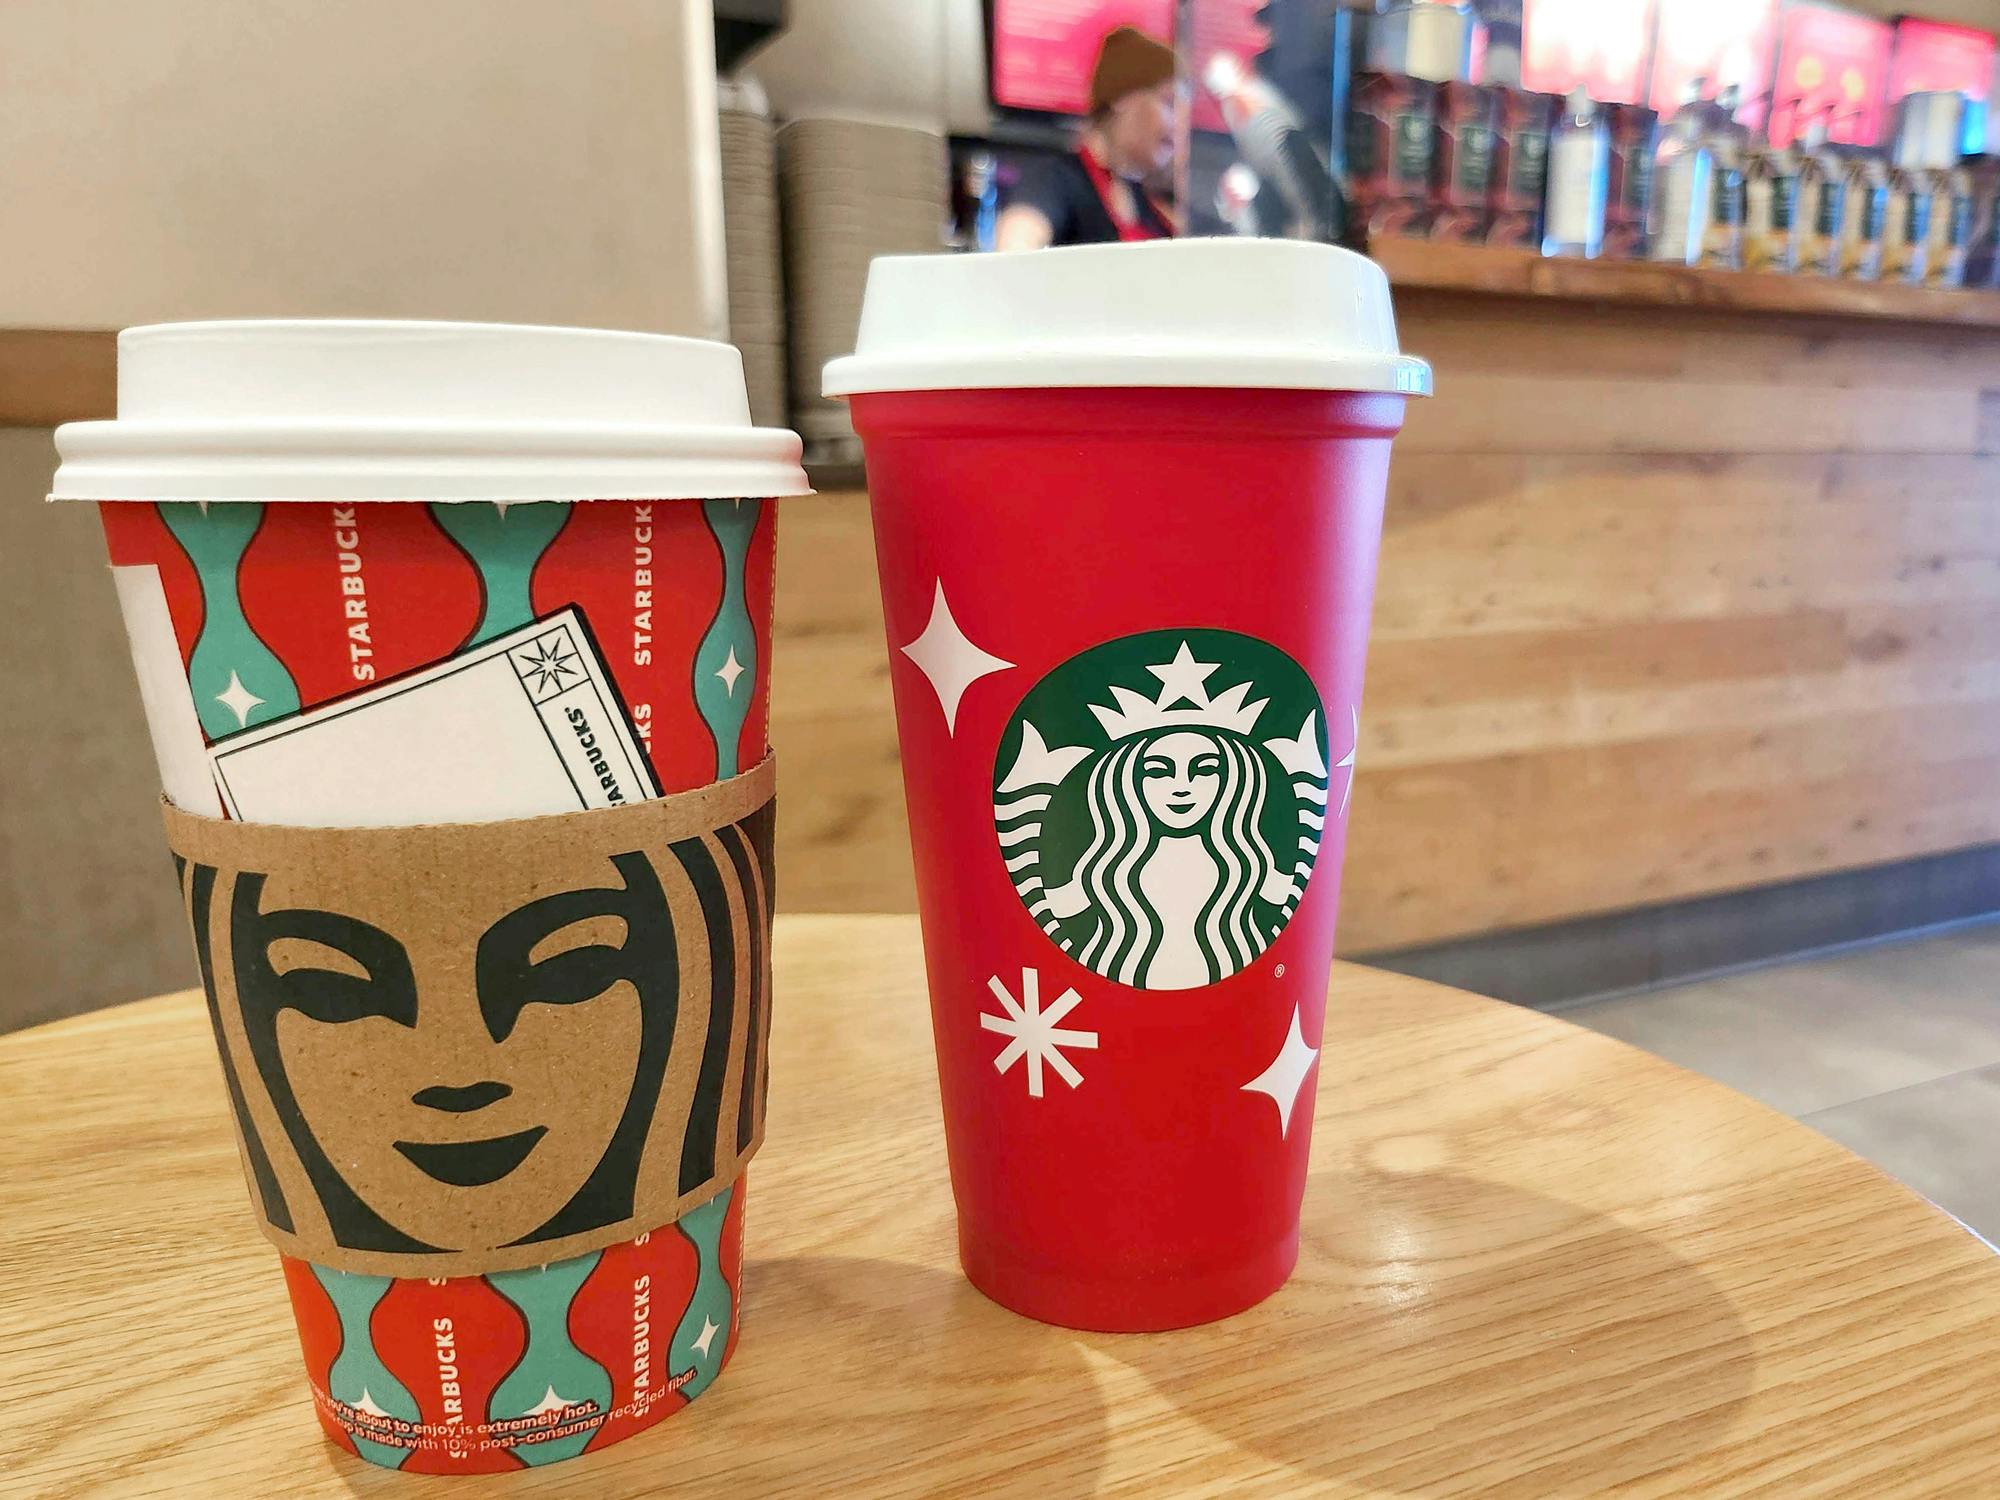 starbucks red cup next to holiday cup on table